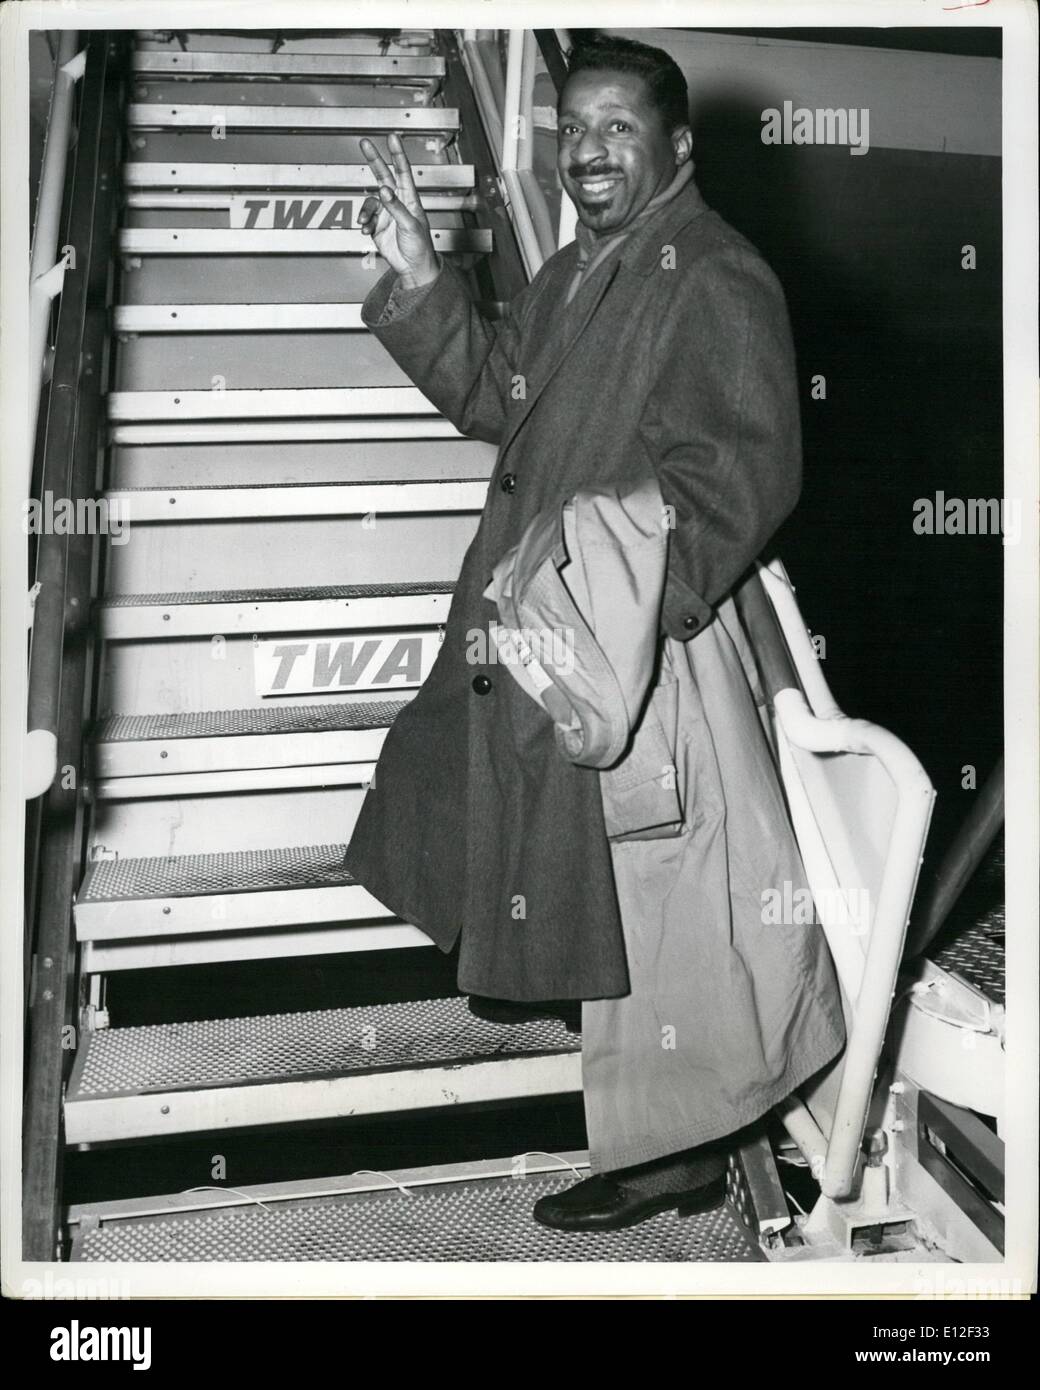 Dec. 21, 2011 - Idle-field Airport, N.Y., Dec. 11: Jazz Pianist Erroll Garner has his picture taken prior to boarding a TWA non-stop jetsream flight to Paris his first concert tour of Europe. His Initial engagement will take place on Dec. 5 at the Olympia Theater in Paris for three weeks. Garner, who will remain aboard until the middle of January, will receive a ''Grand Prix Du Disque'' trophy in Paris for his latest Columbia Album. Stock Photo